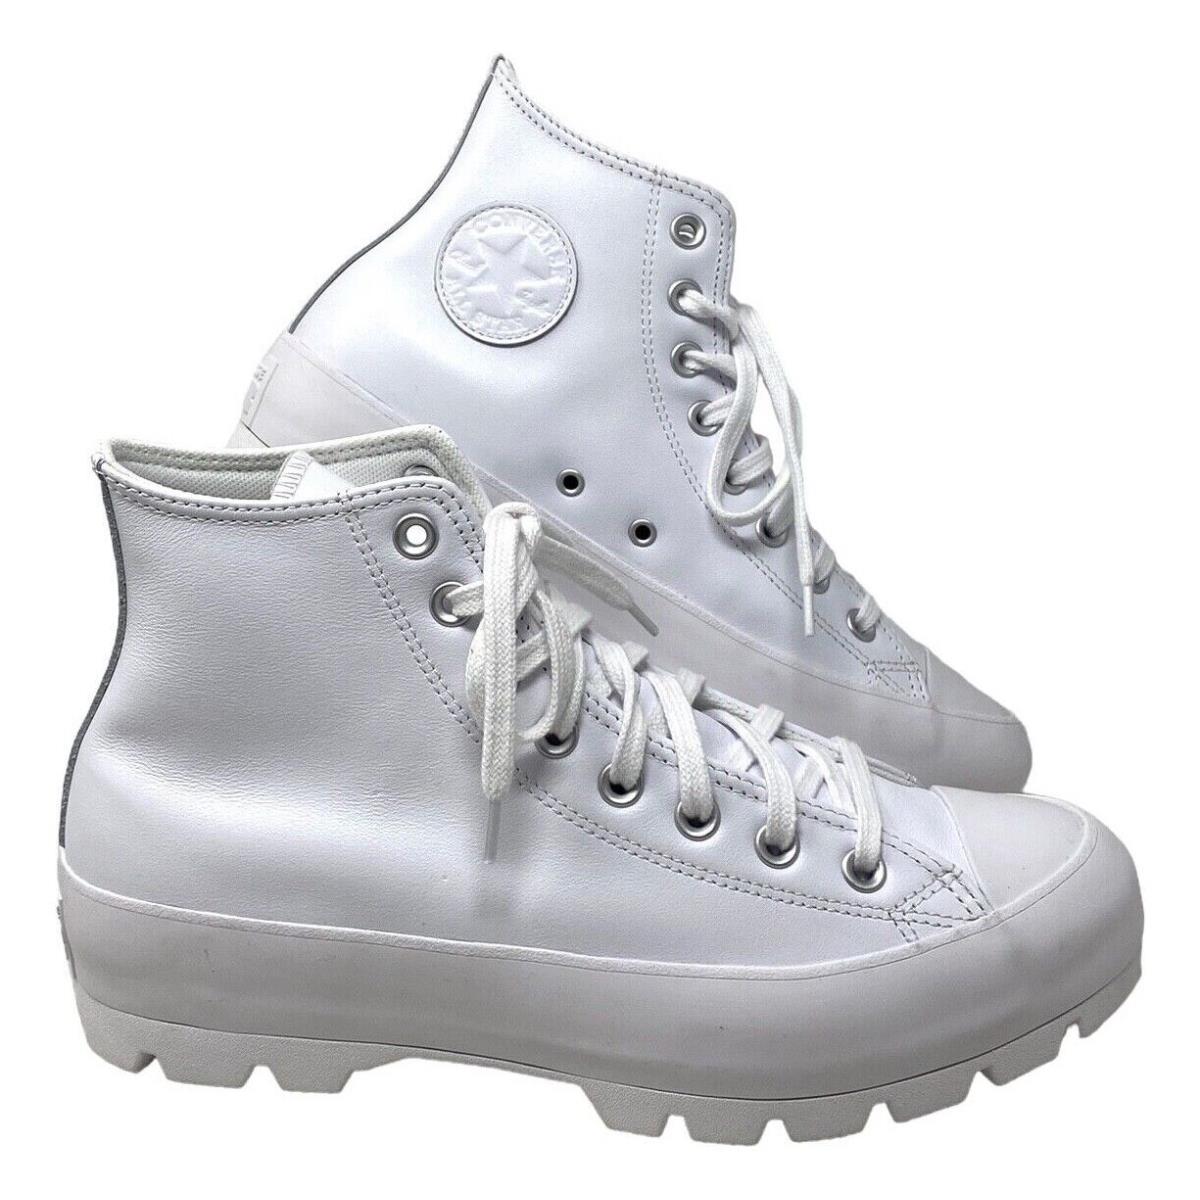 Converse Ctas Lugged Leather Shoes White Casual Women Hi Sneakers Custom 570634C